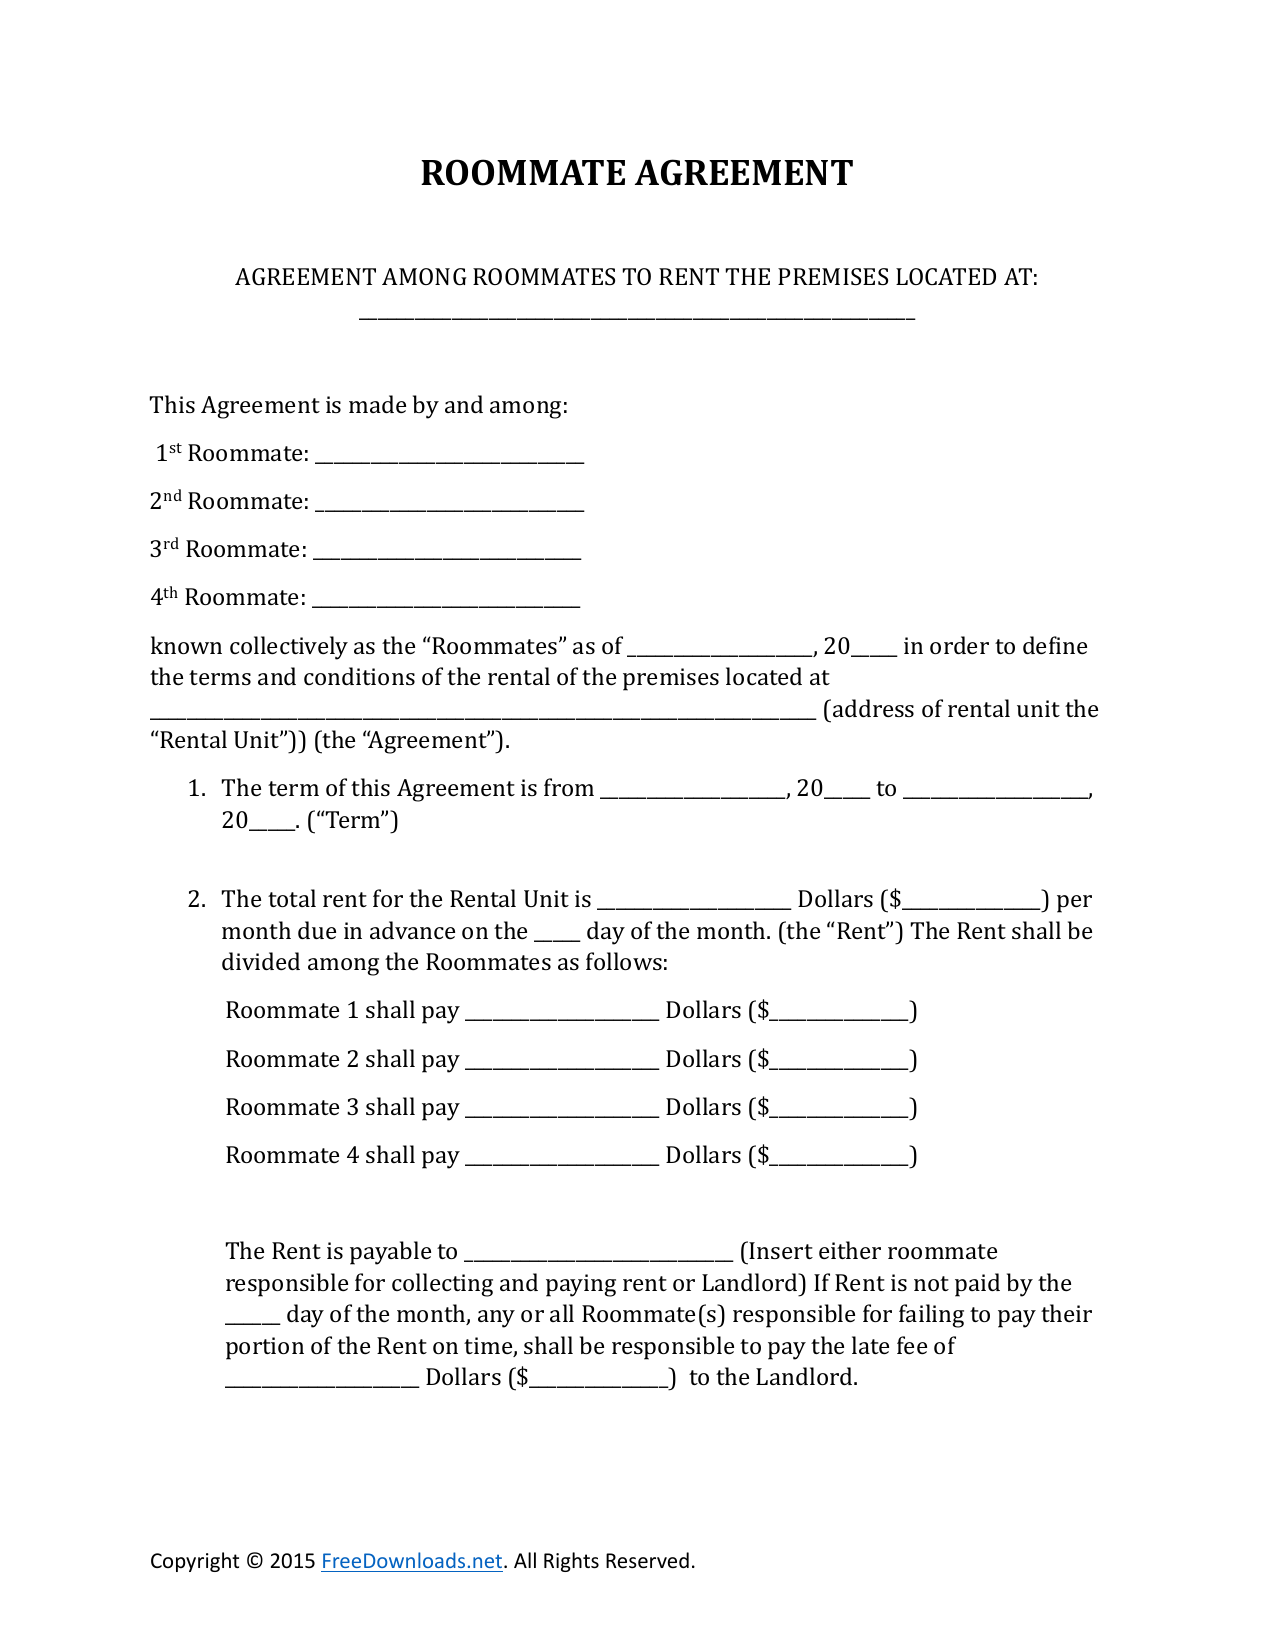 Download Roommate Rental Lease Agreement Form PDF RTF Word